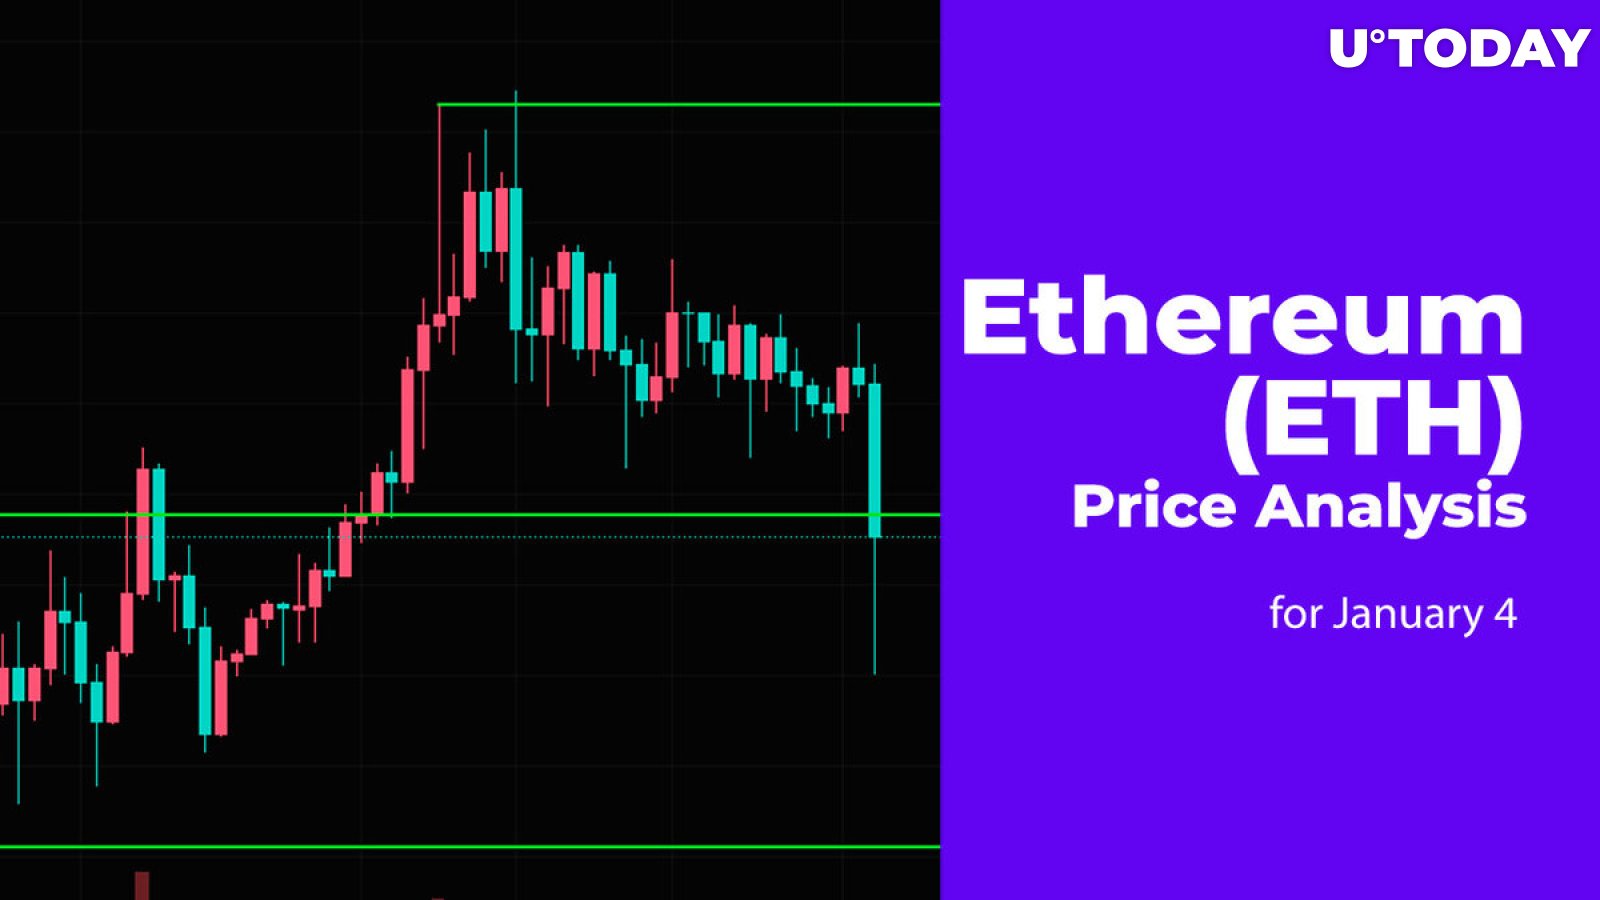 Ethereum (ETH) Price Analysis for January 4